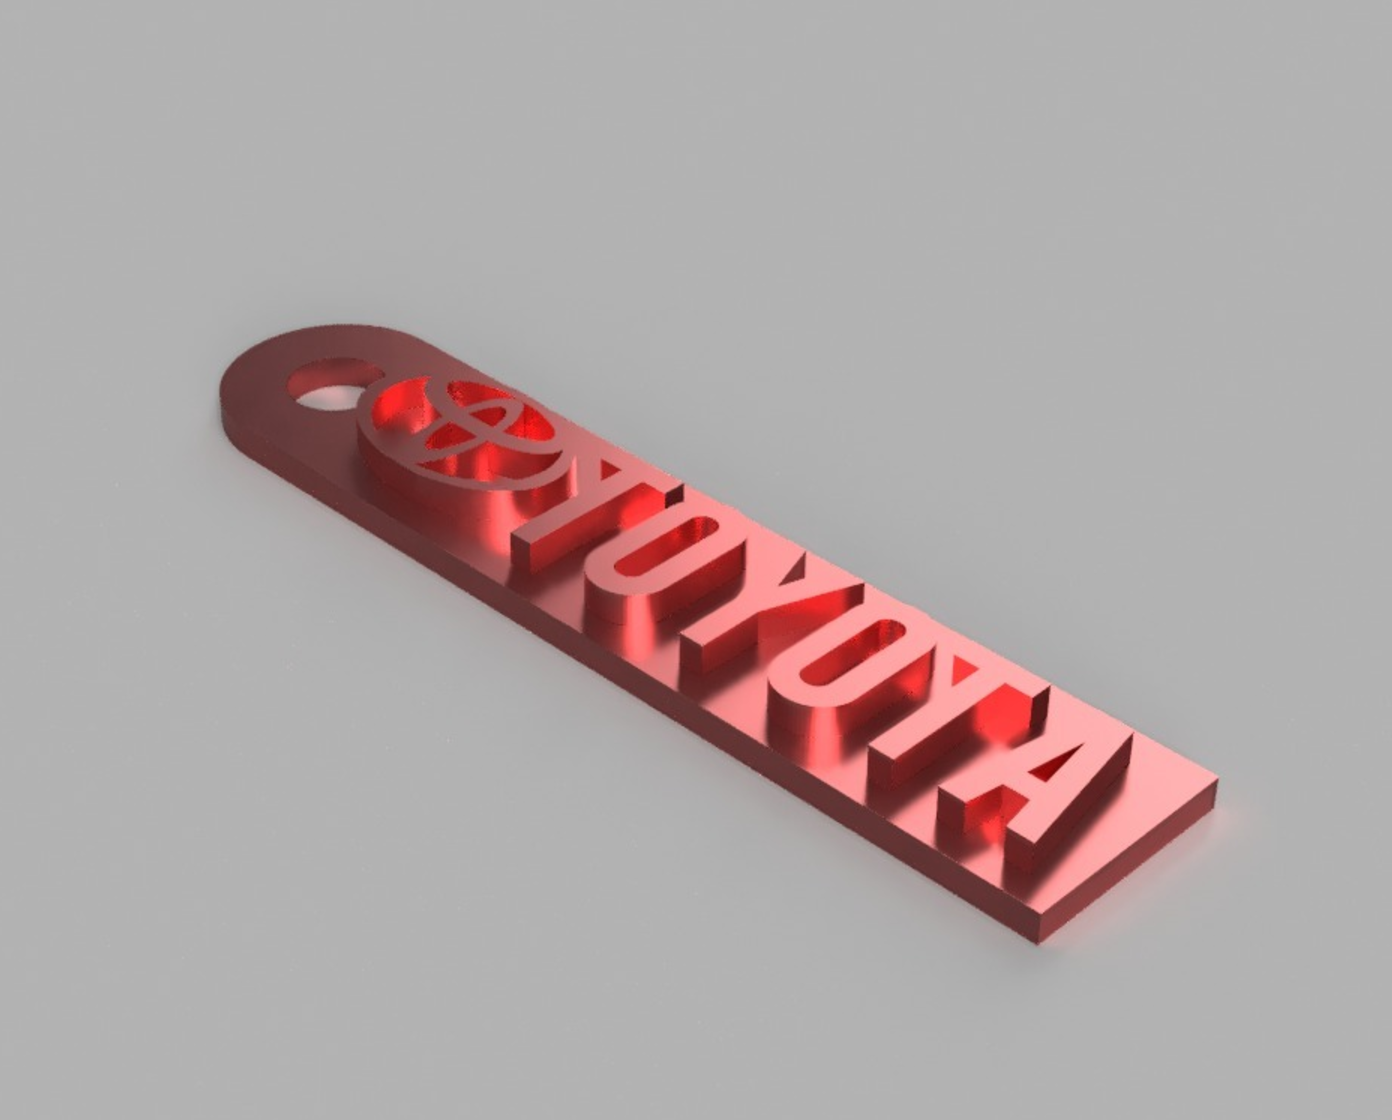 Capture d’écran 2017-06-09 à 09.30.50.png Download free STL file Toyota Keychains ( A keychain for every model ) • 3D printing template, 3DPrintingGurus